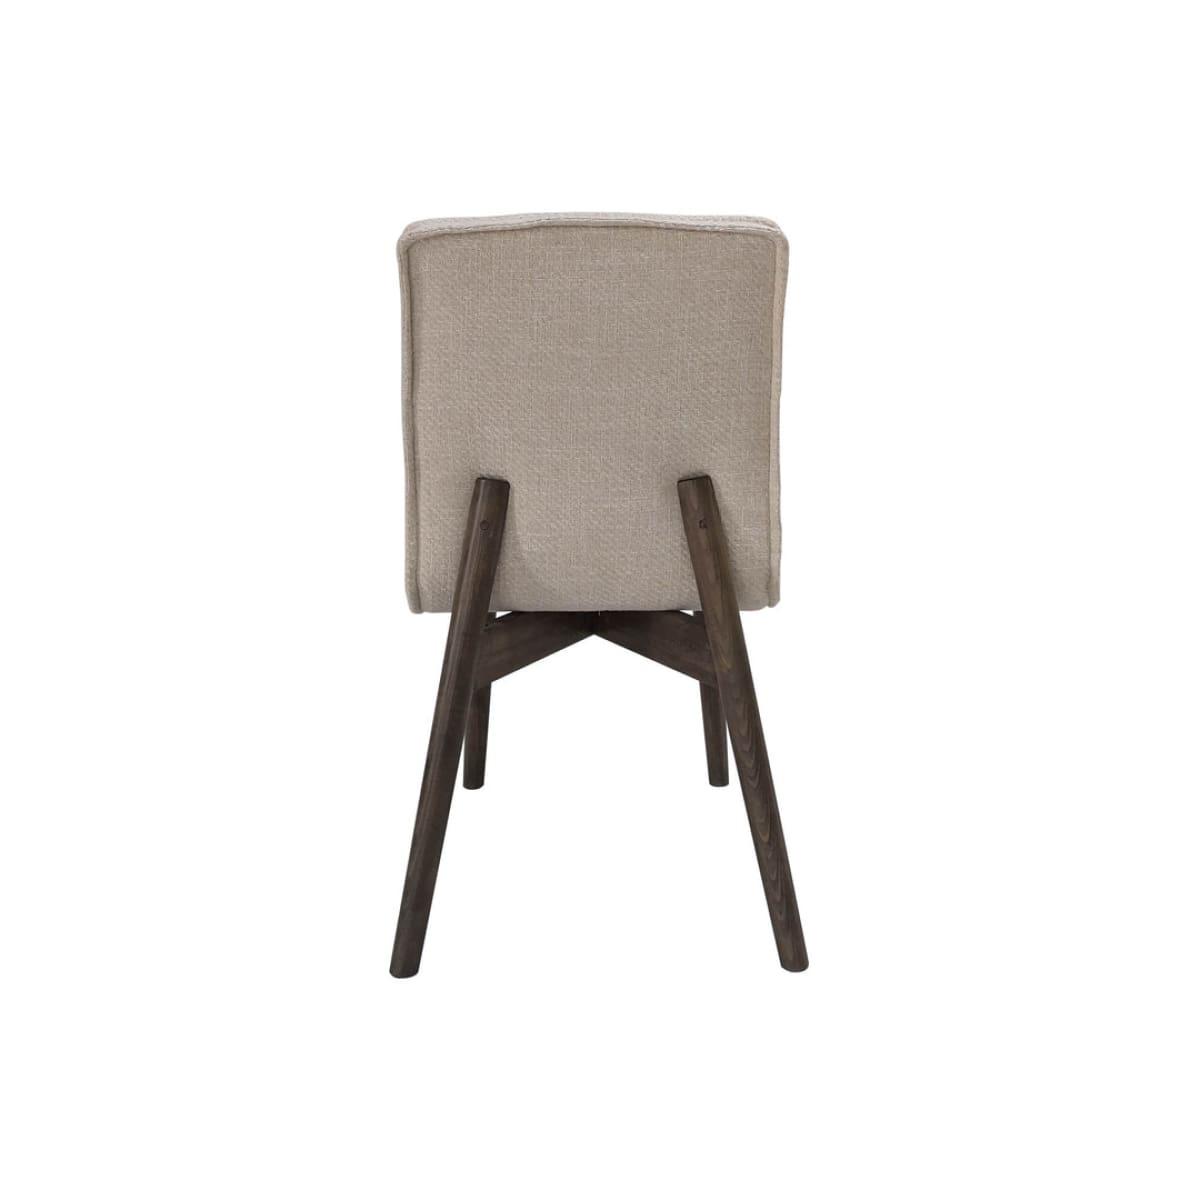 Franklyn Dining Chair - lh-import-dining-chairs